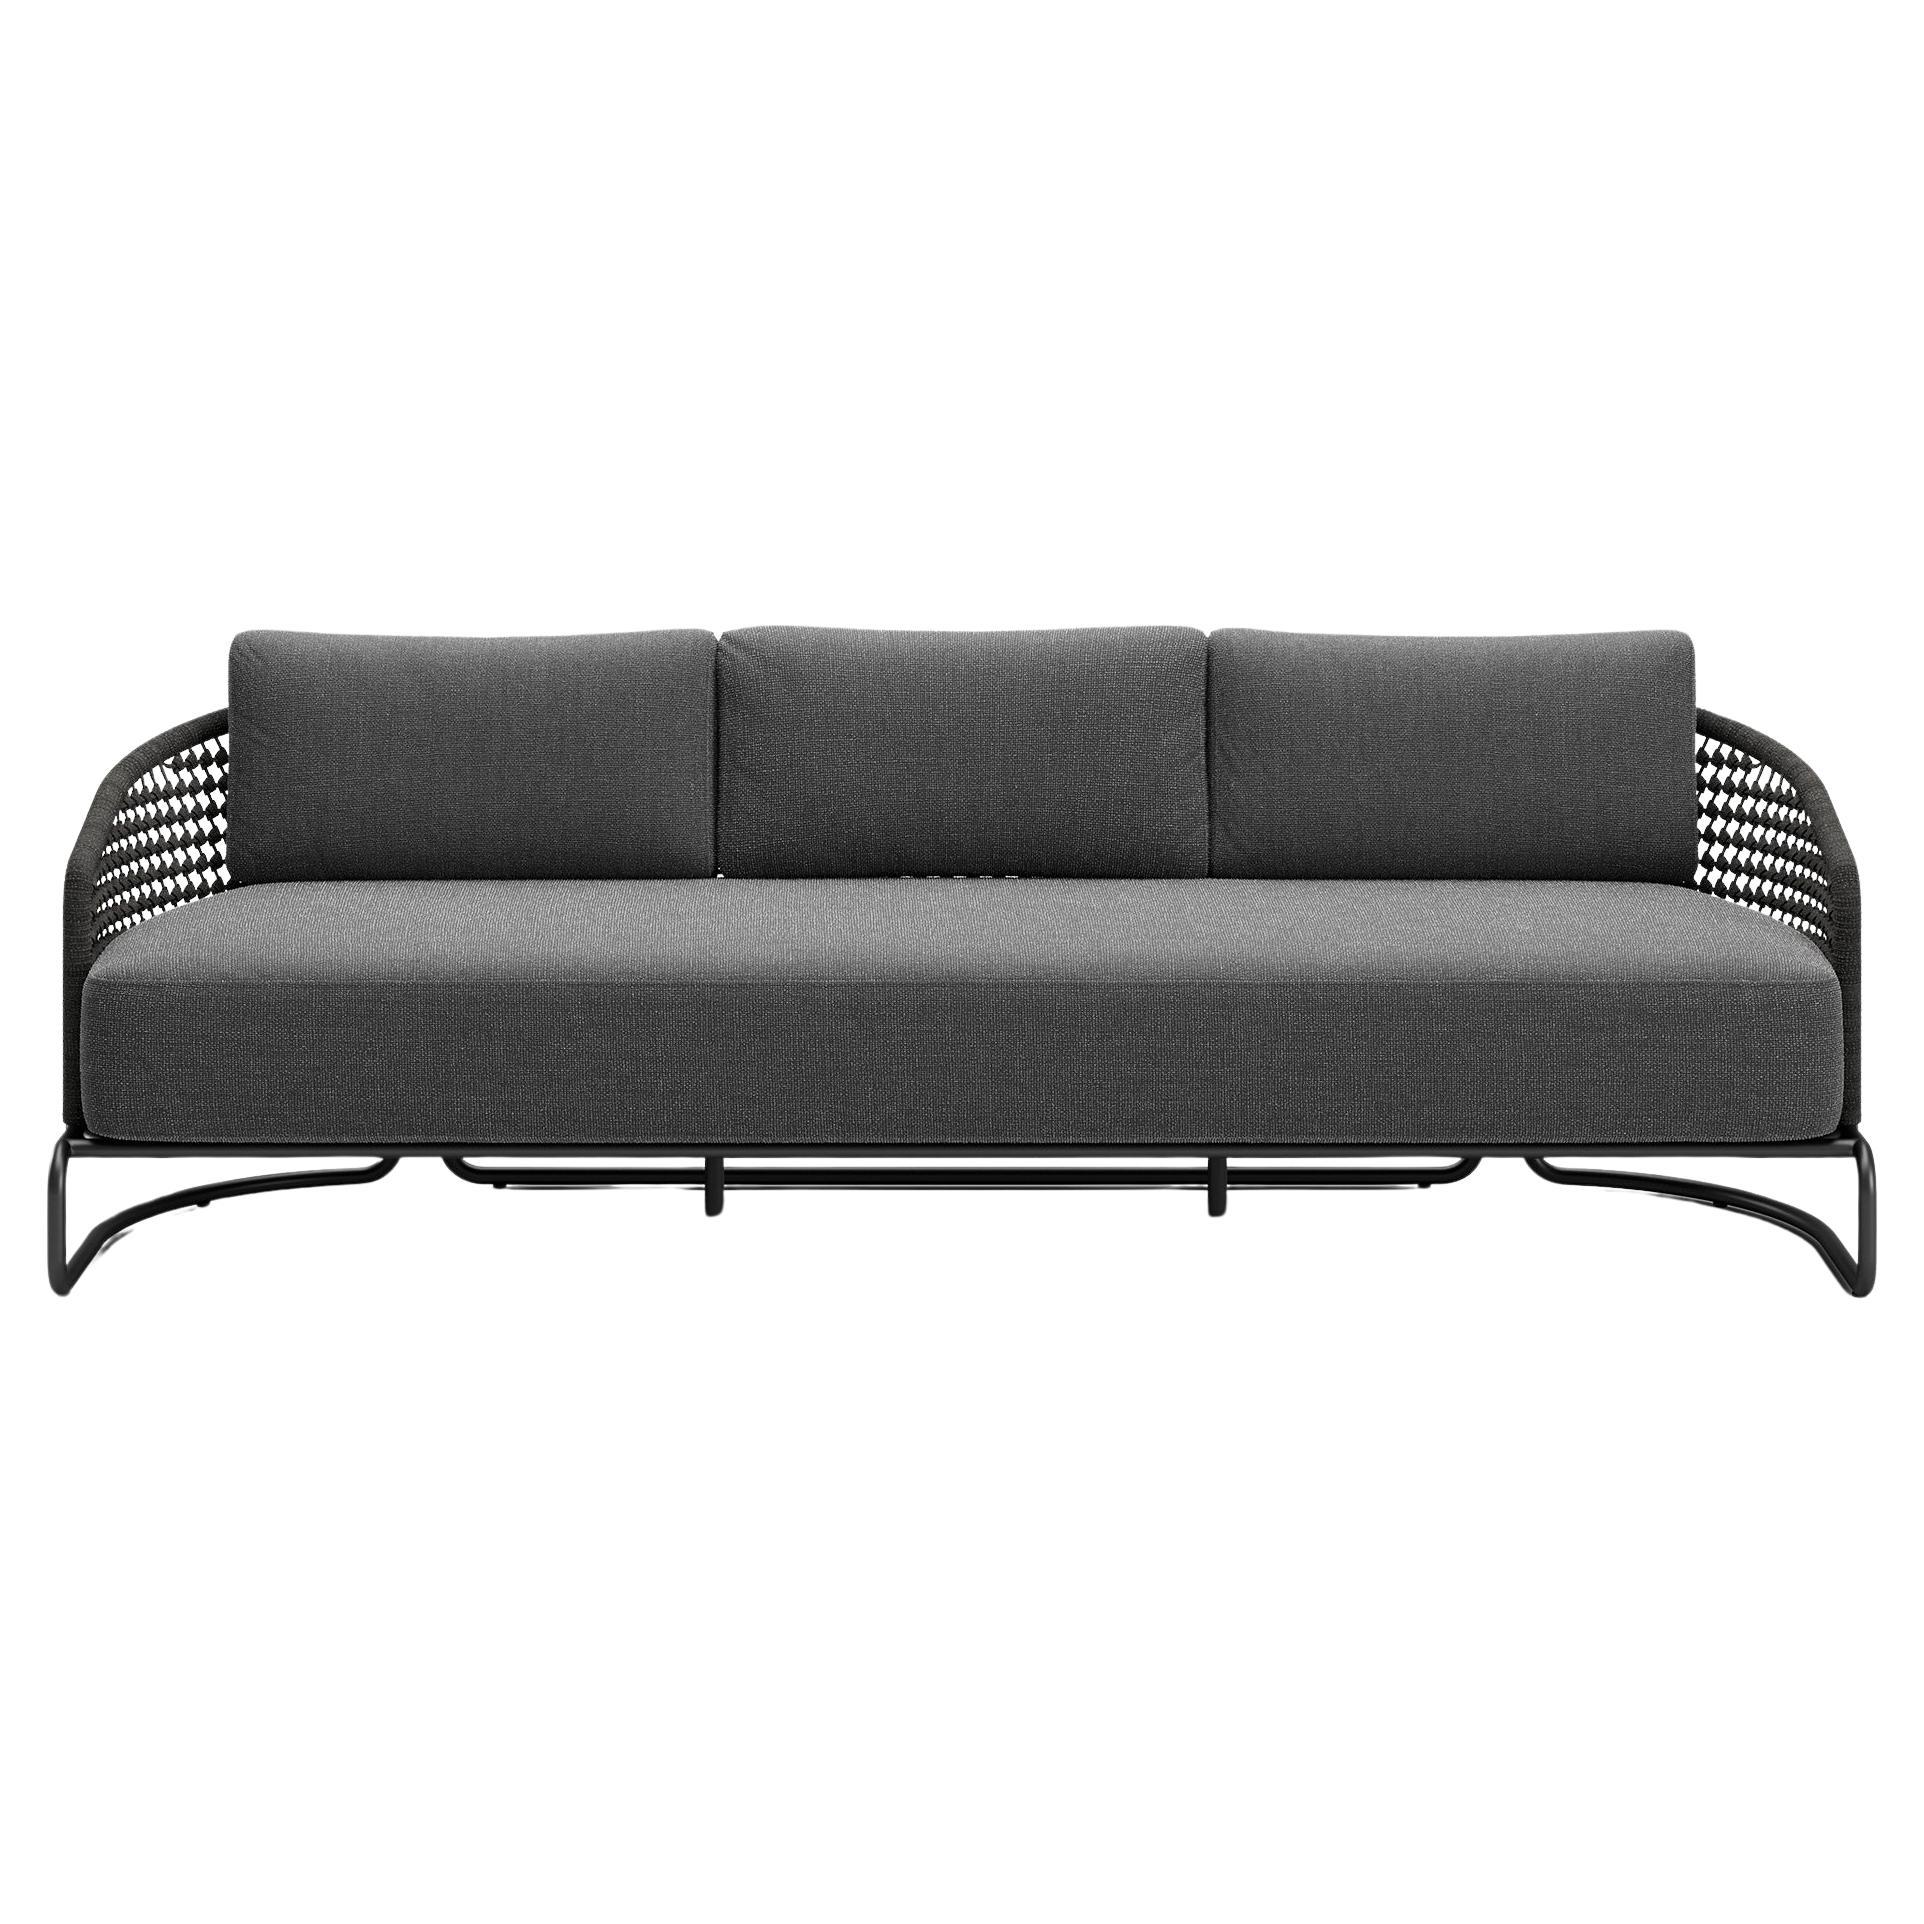 Pigalle Outdoor 3 Seater Sofa by Snoc